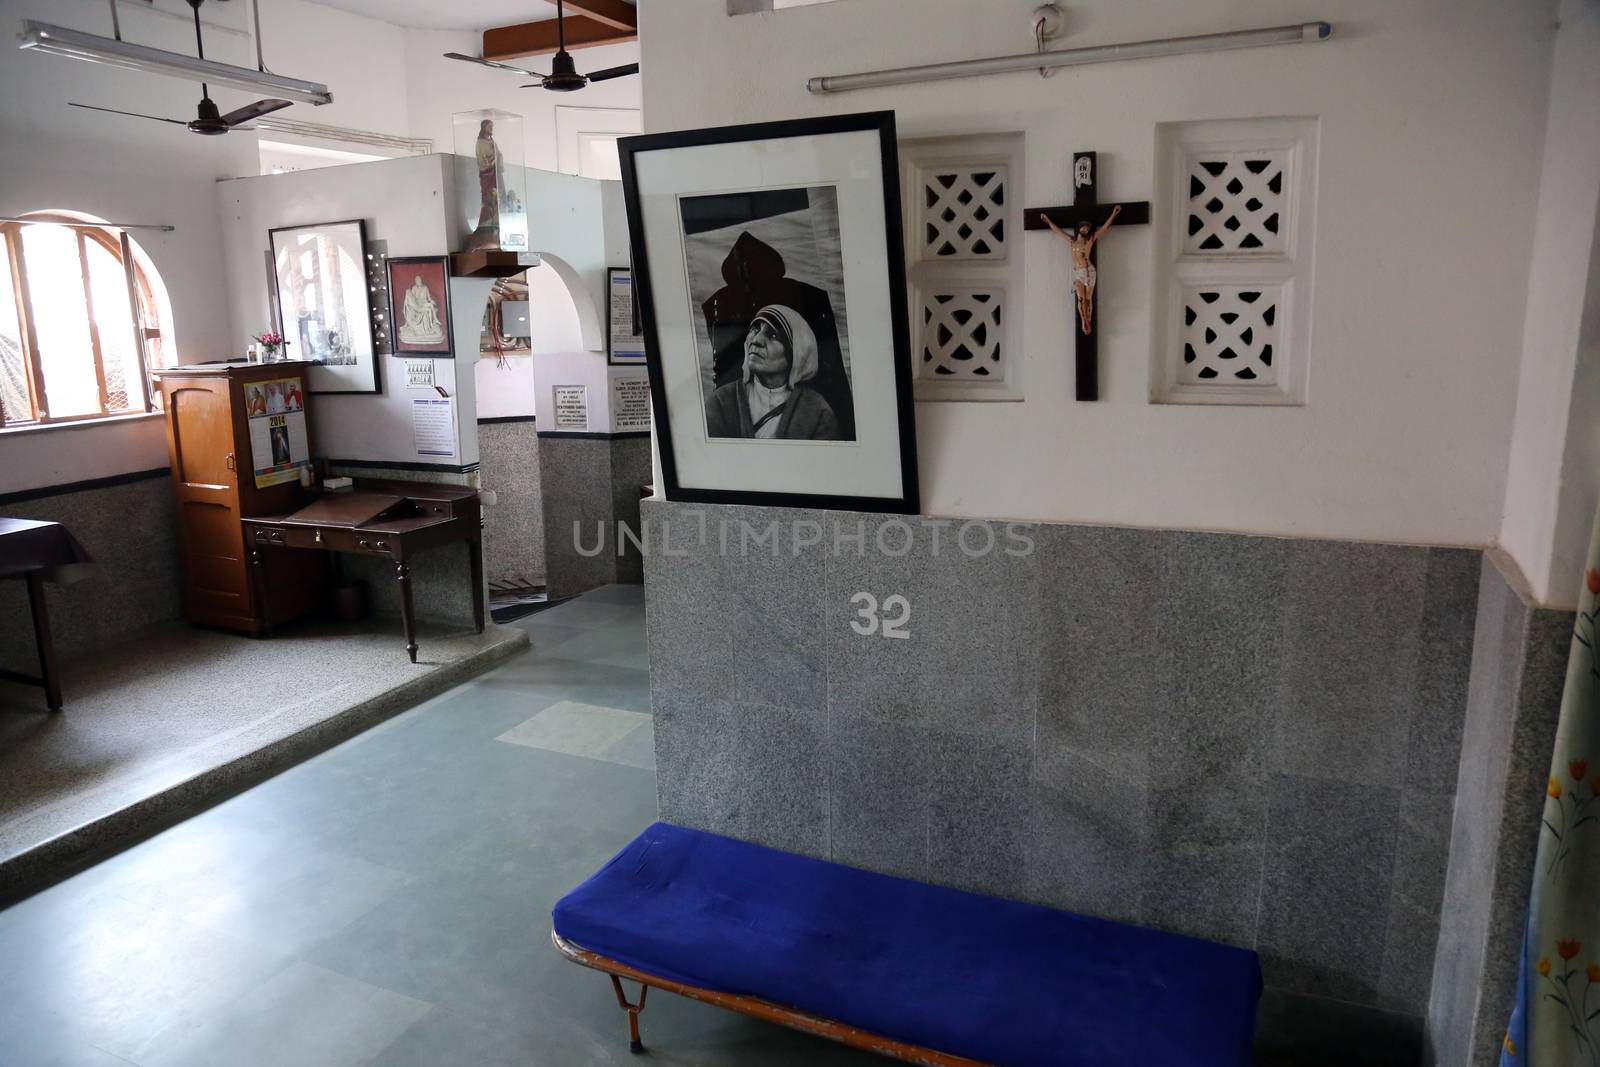 Nirmal Hriday, Home for the Sick and Dying Destitutes, one of the buildings established by the Mother Teresa and run by the Missionaries of Charity in Kolkata, India on February 10, 2014.